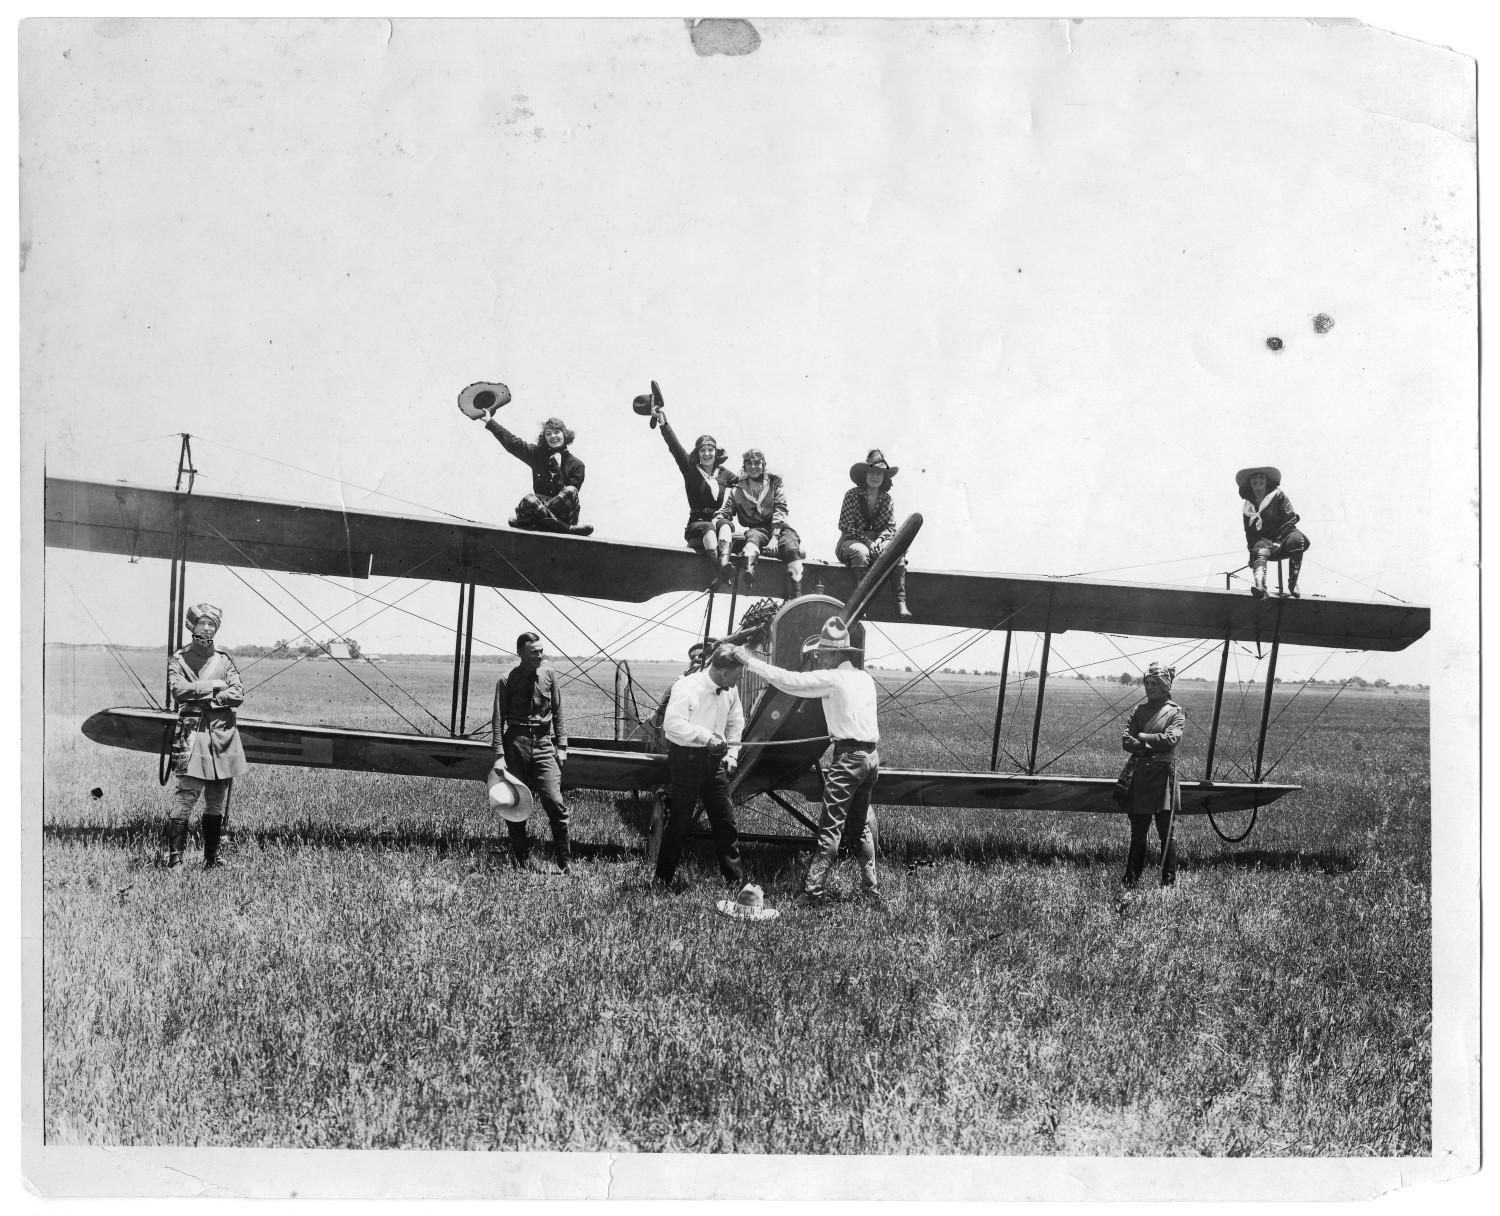 Group on the wing [of a bi-plane], c. 1915
                                                
                                                    [Sequence #]: 1 of 1
                                                